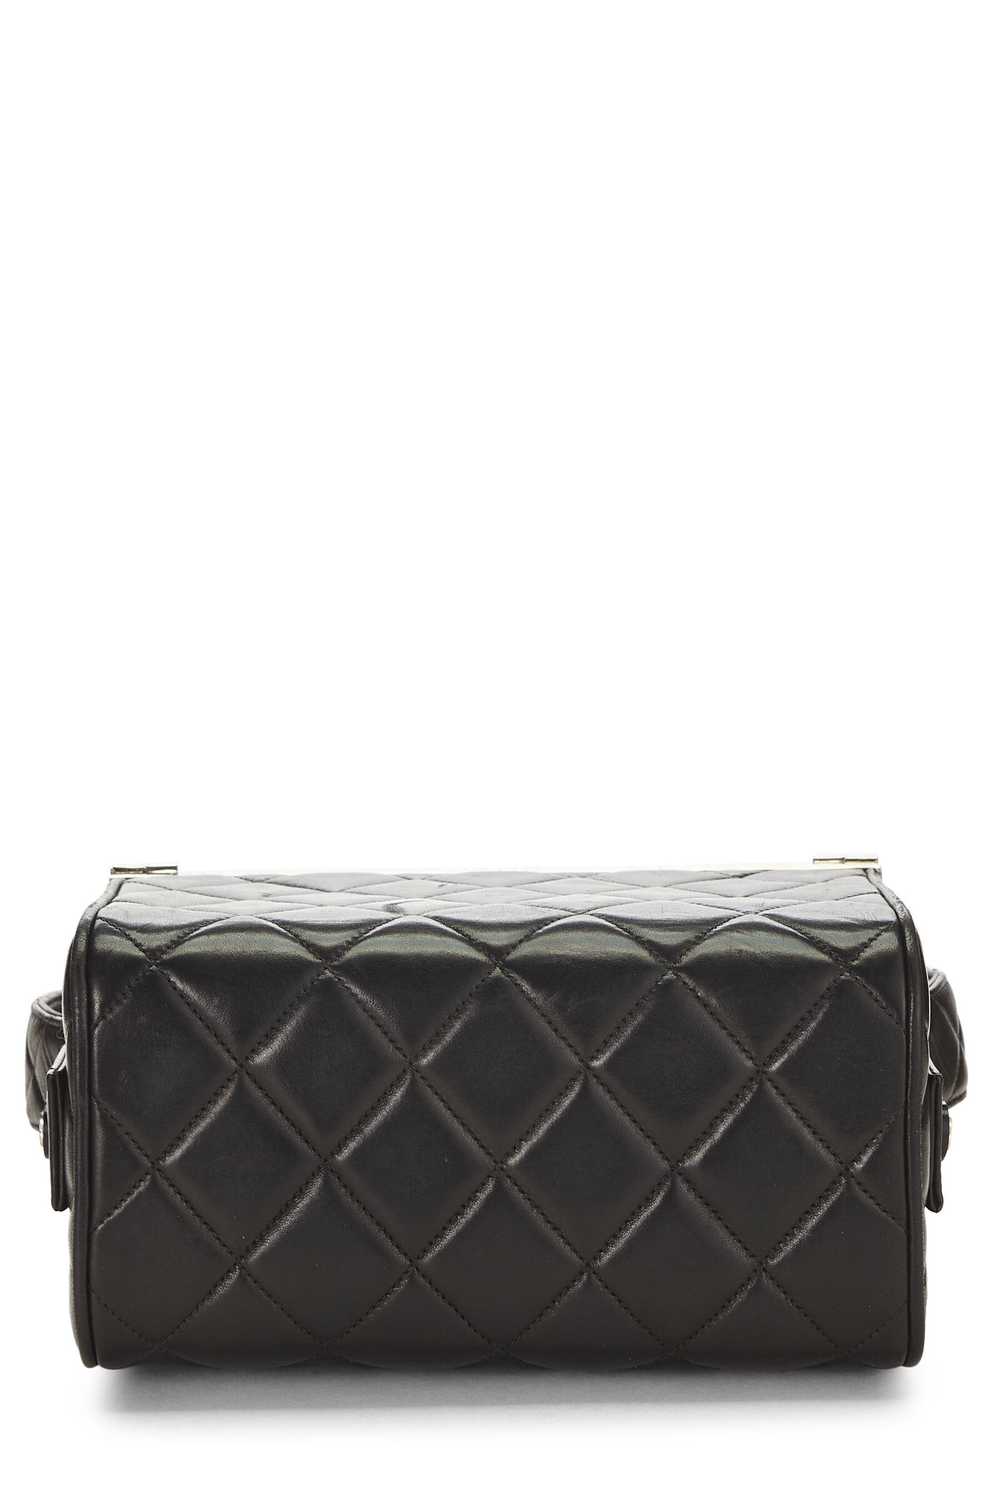 Black Quilted Lambskin Box Vanity Small - image 5